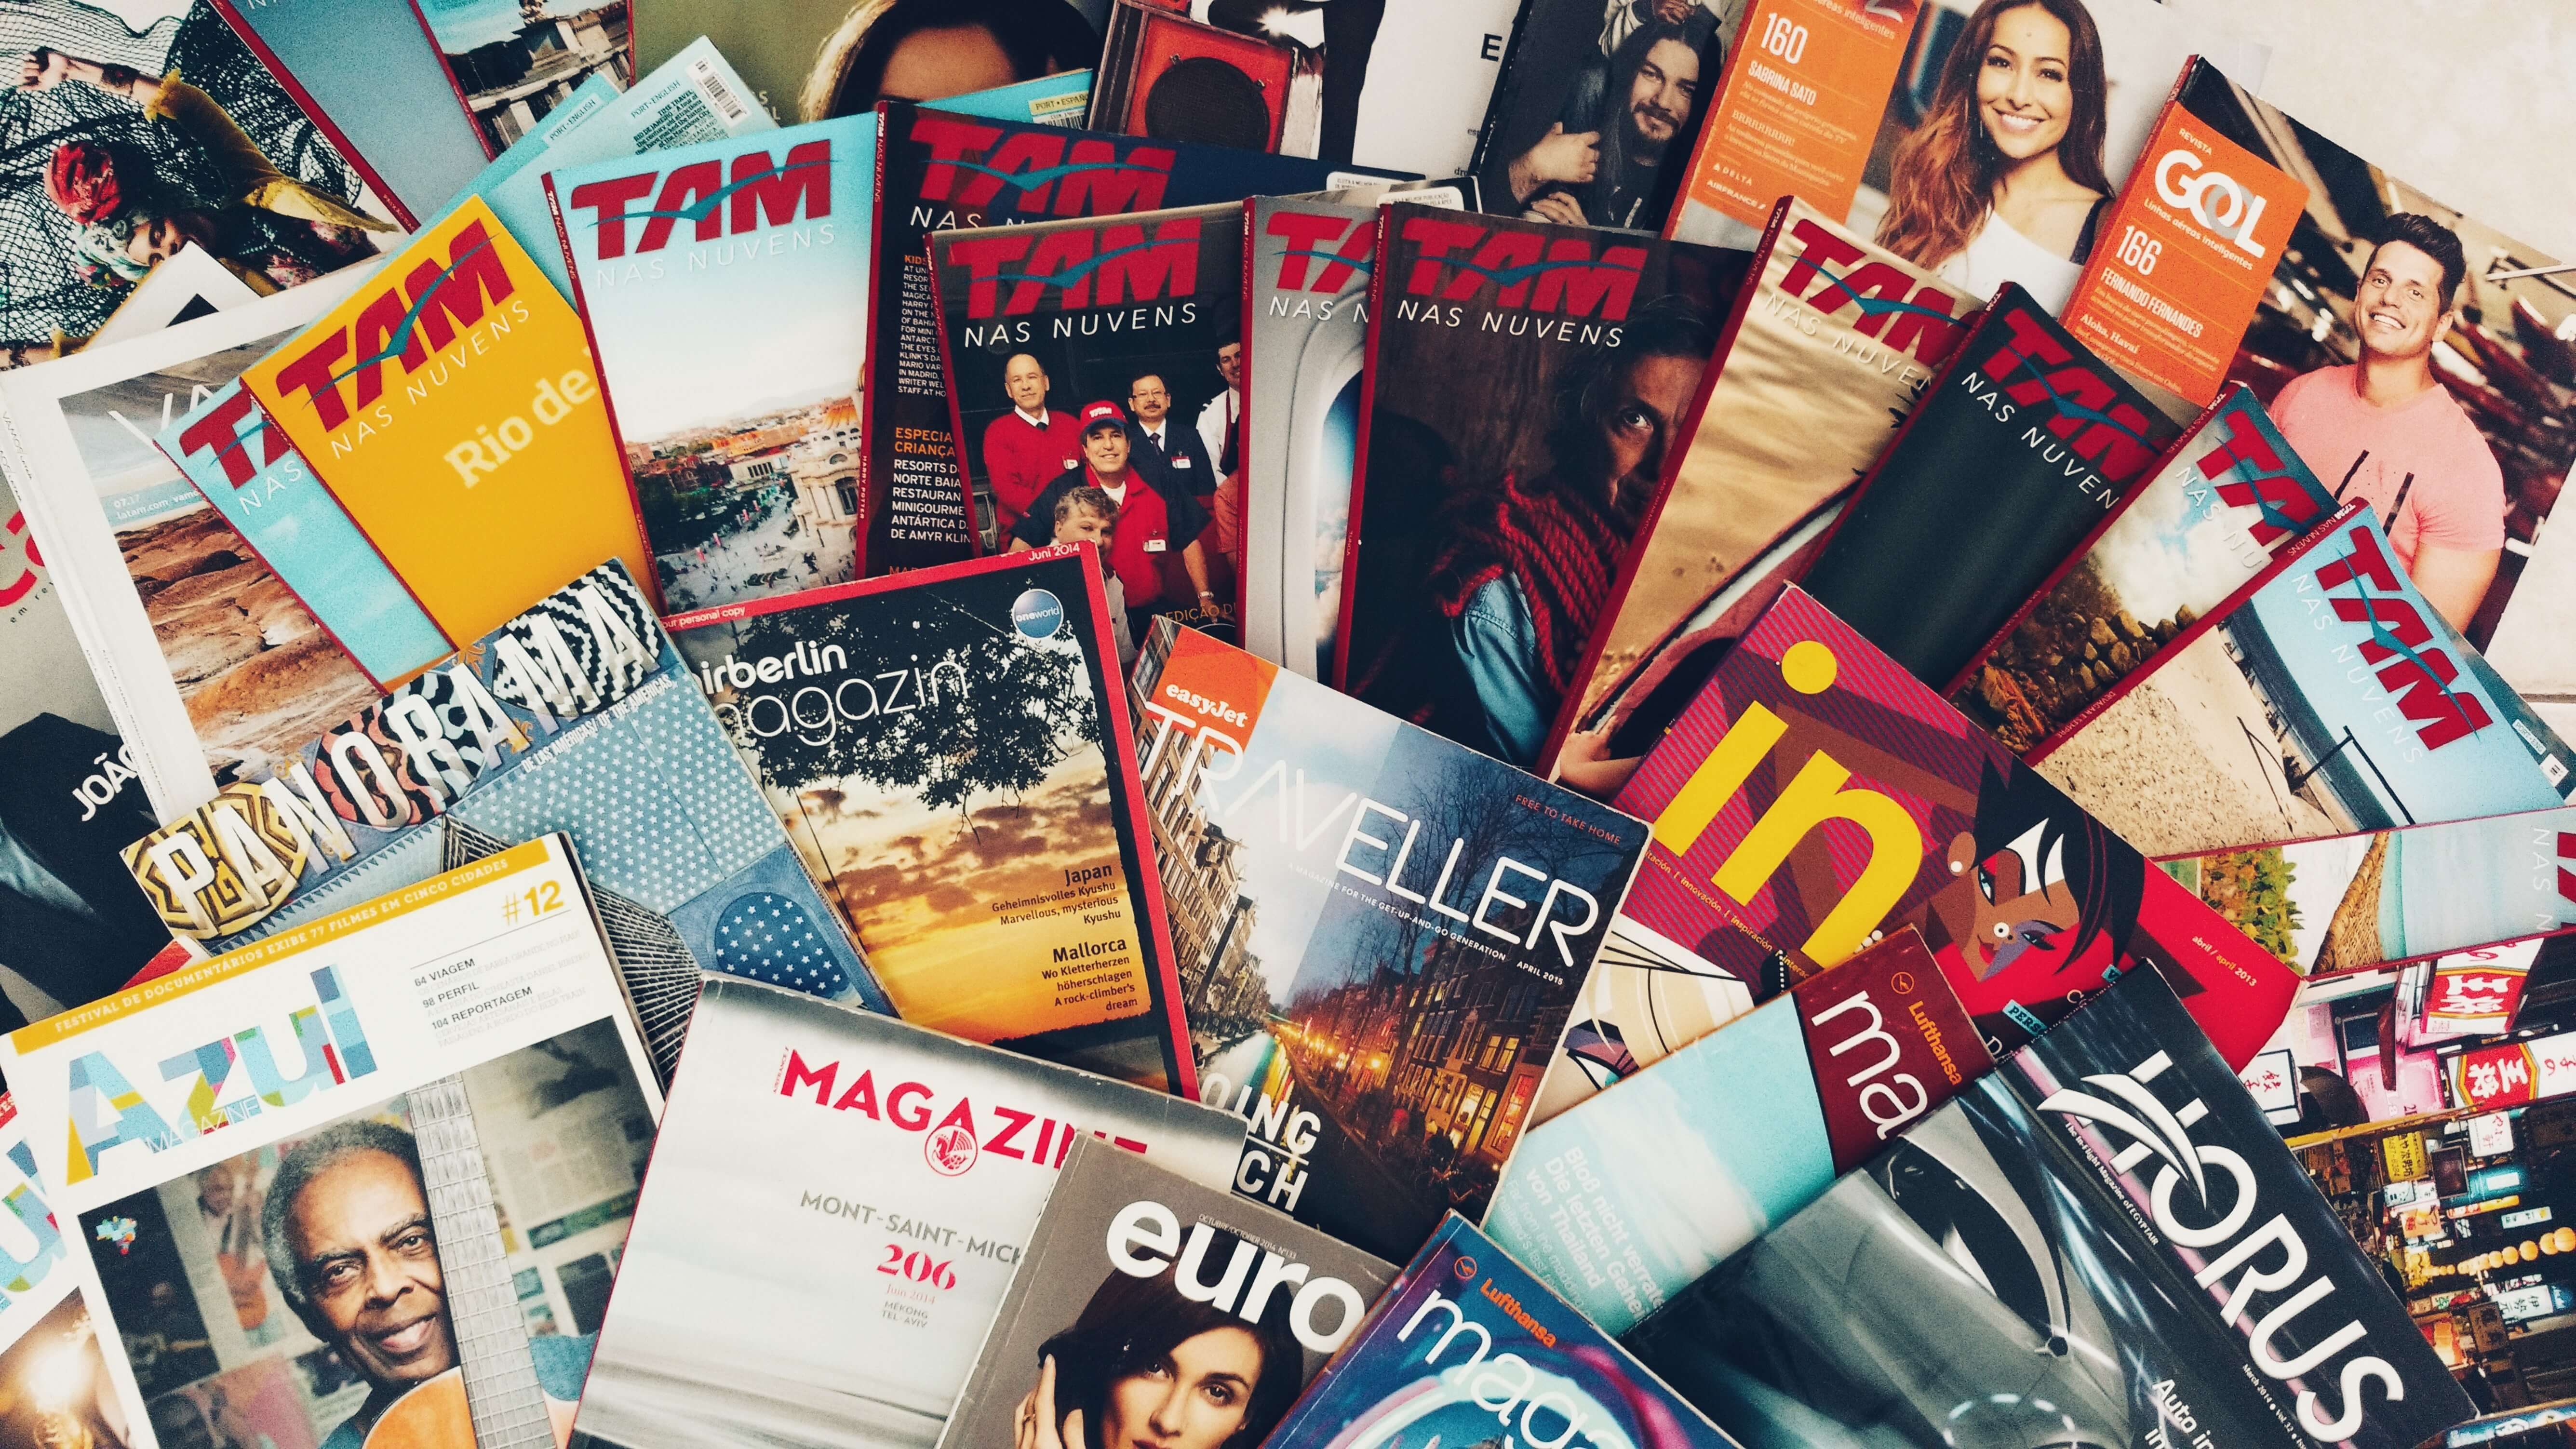 A fanned-out collection of magazines